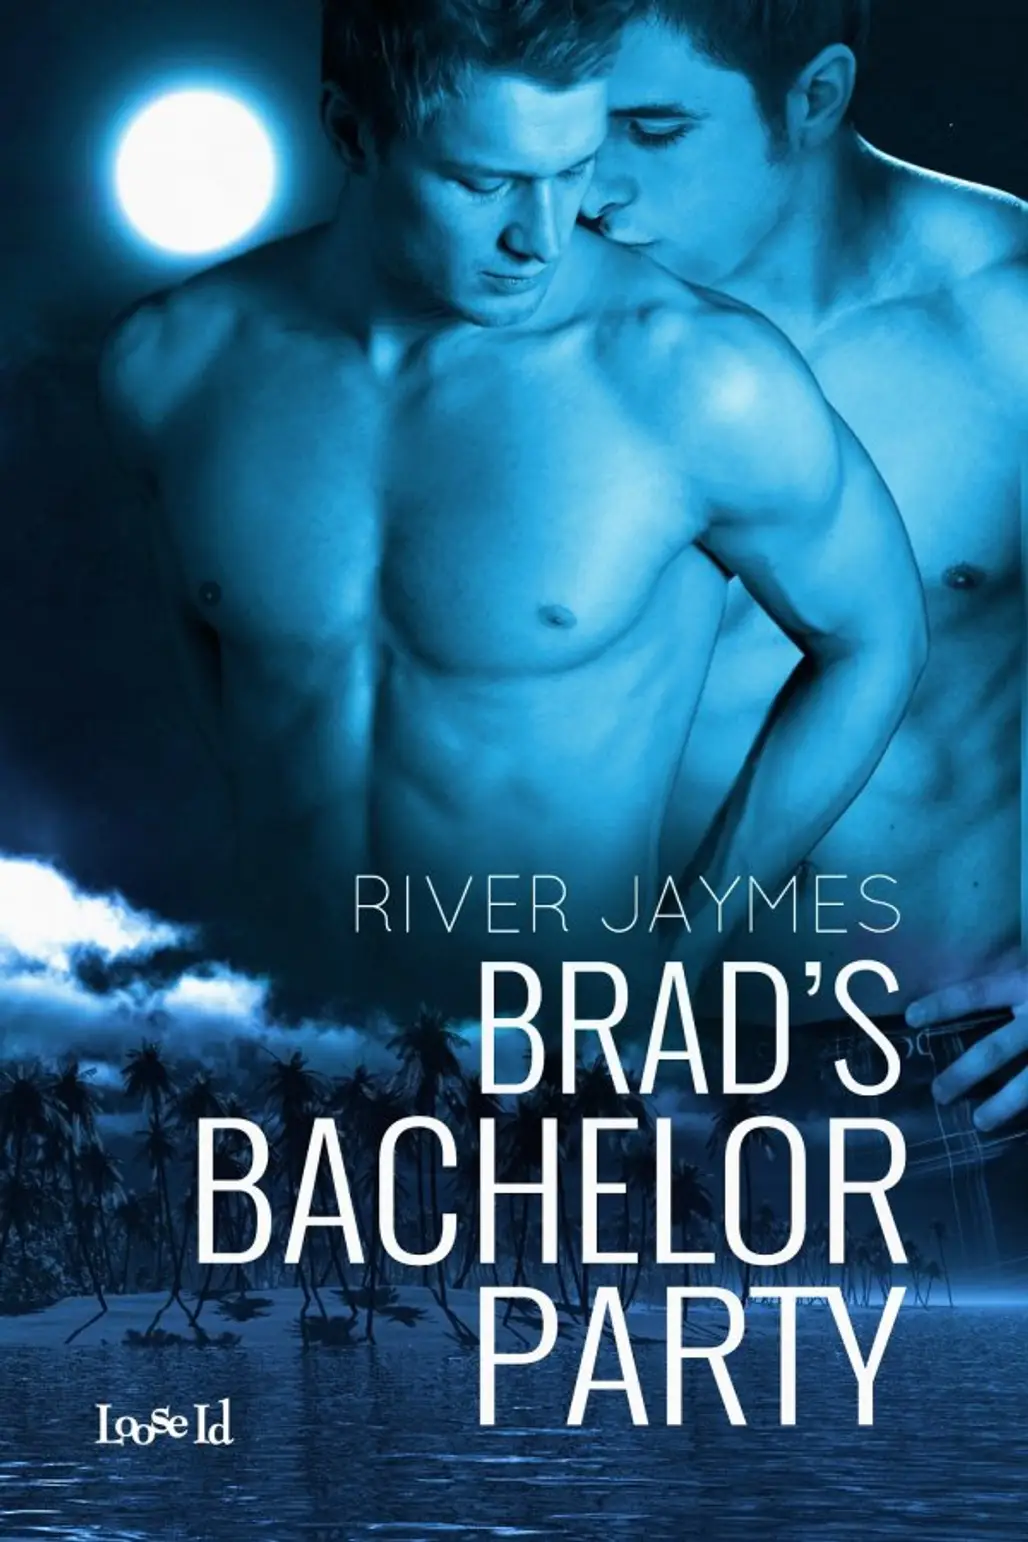 Brad’s Bachelor Party by River Jaymes